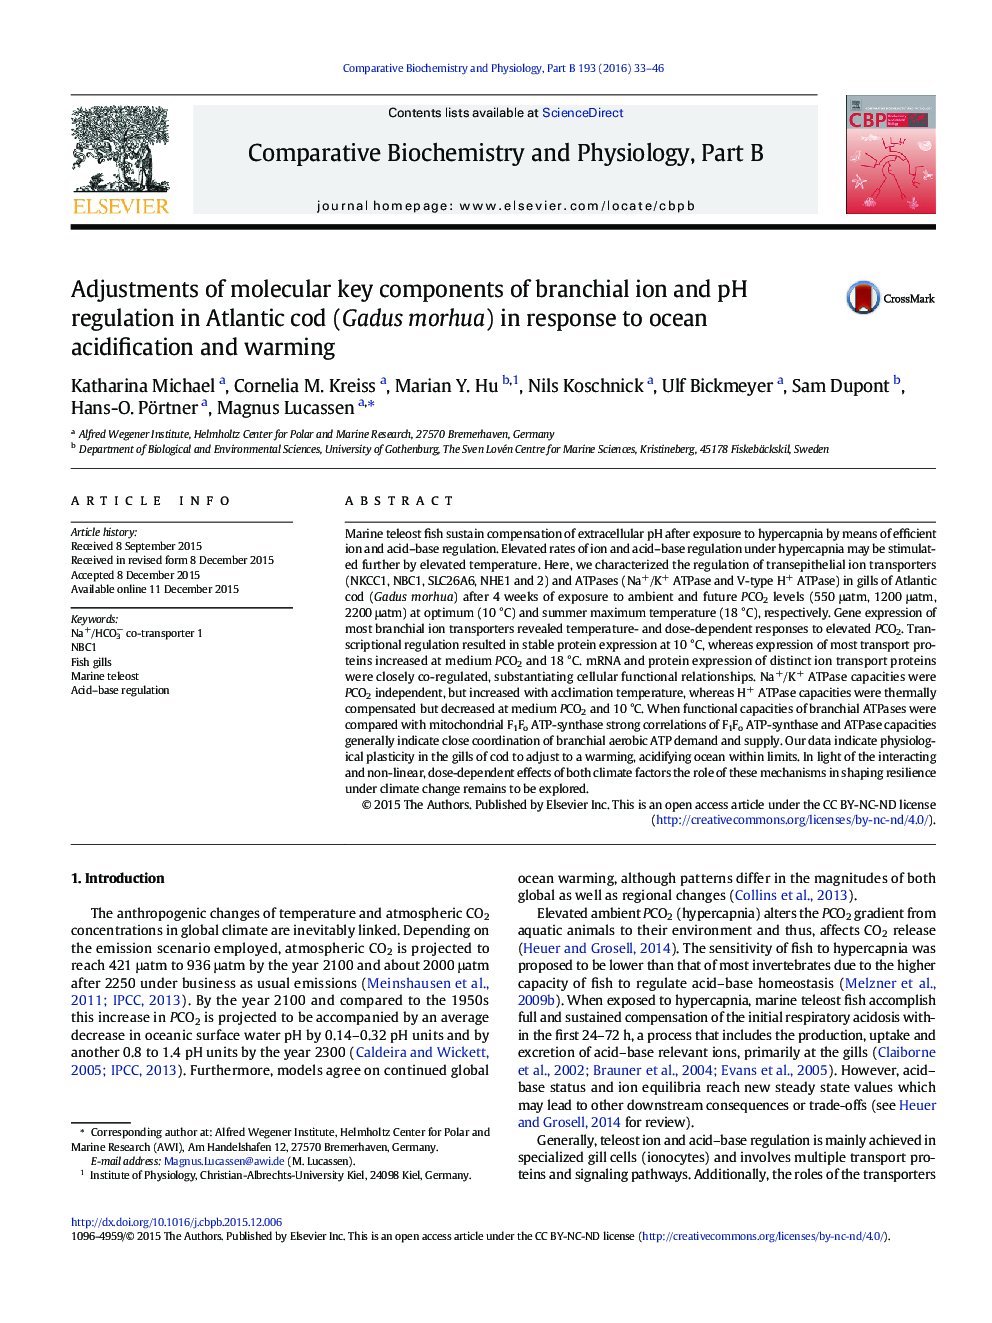 Adjustments of molecular key components of branchial ion and pH regulation in Atlantic cod (Gadus morhua) in response to ocean acidification and warming